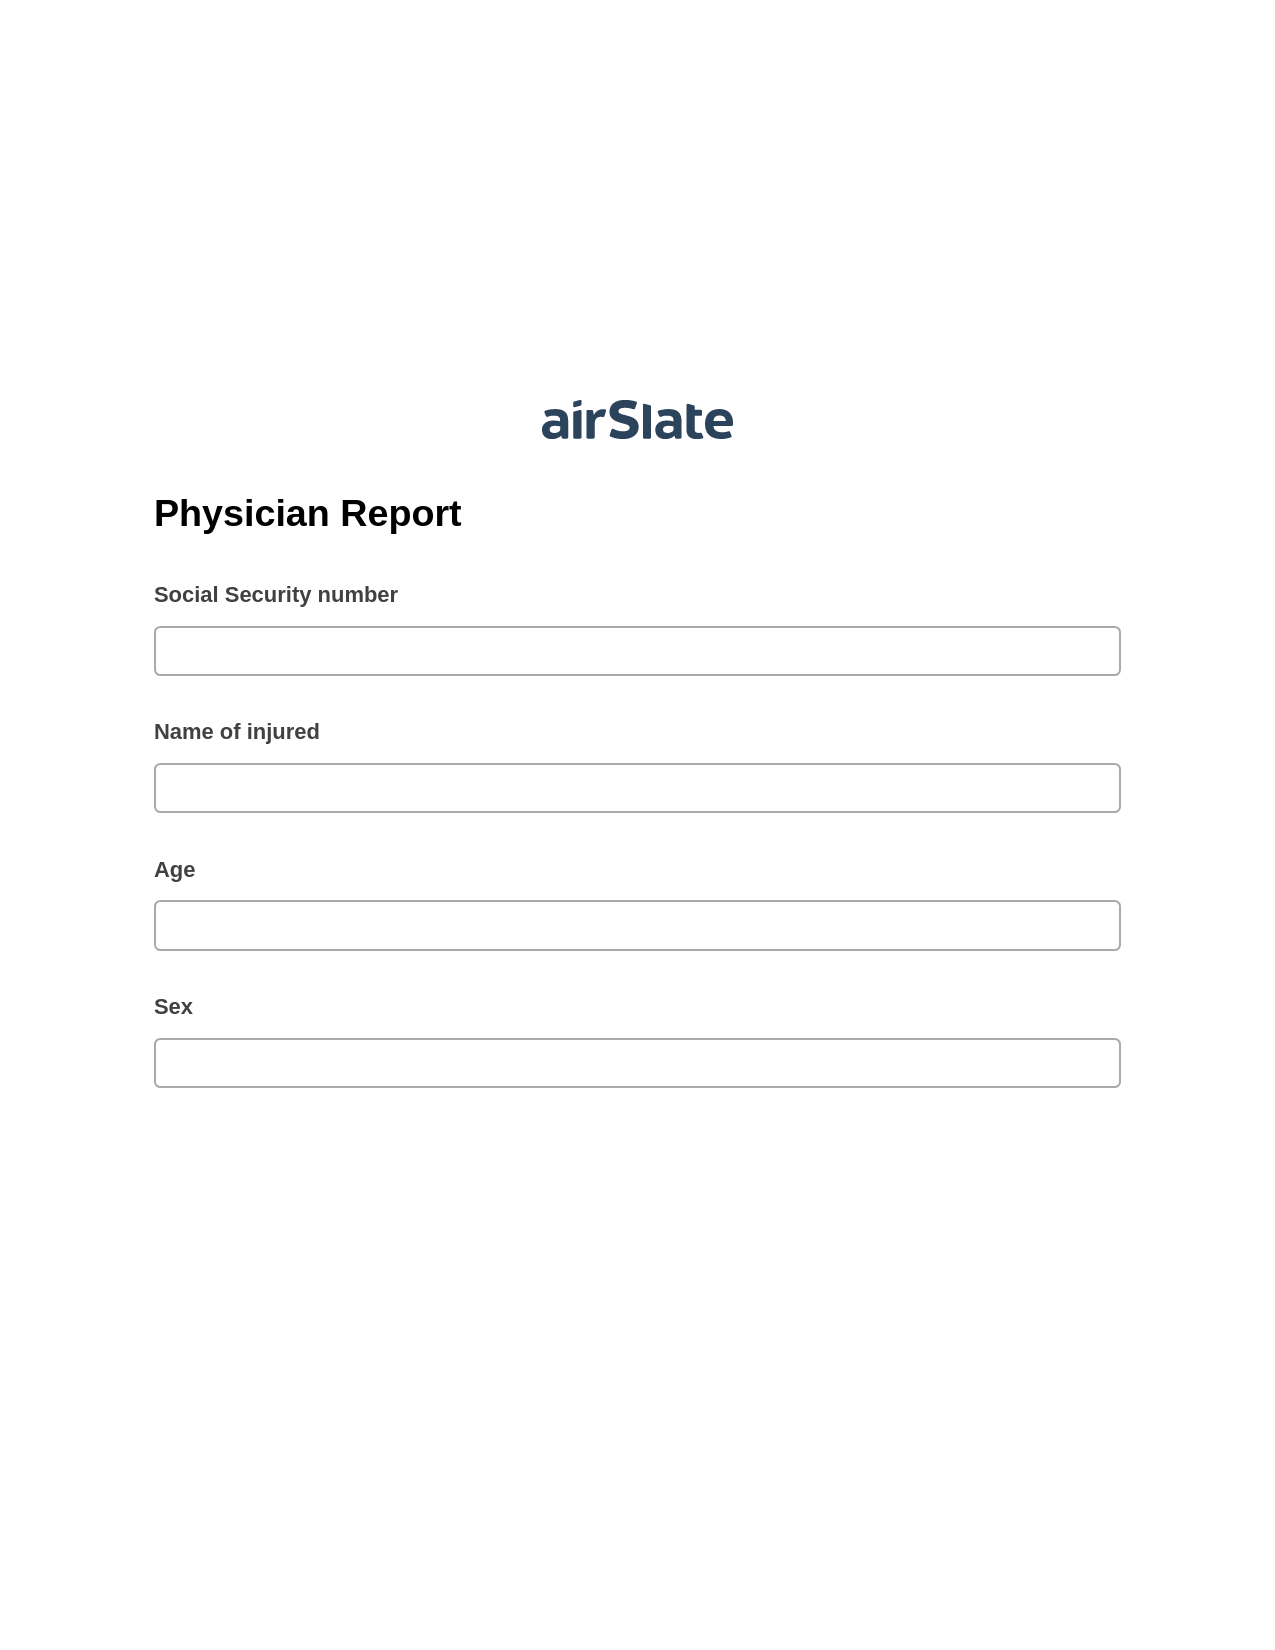 Physician Report Pre-fill from Excel Spreadsheet Bot, Unassign Role Bot, Export to Excel 365 Bot